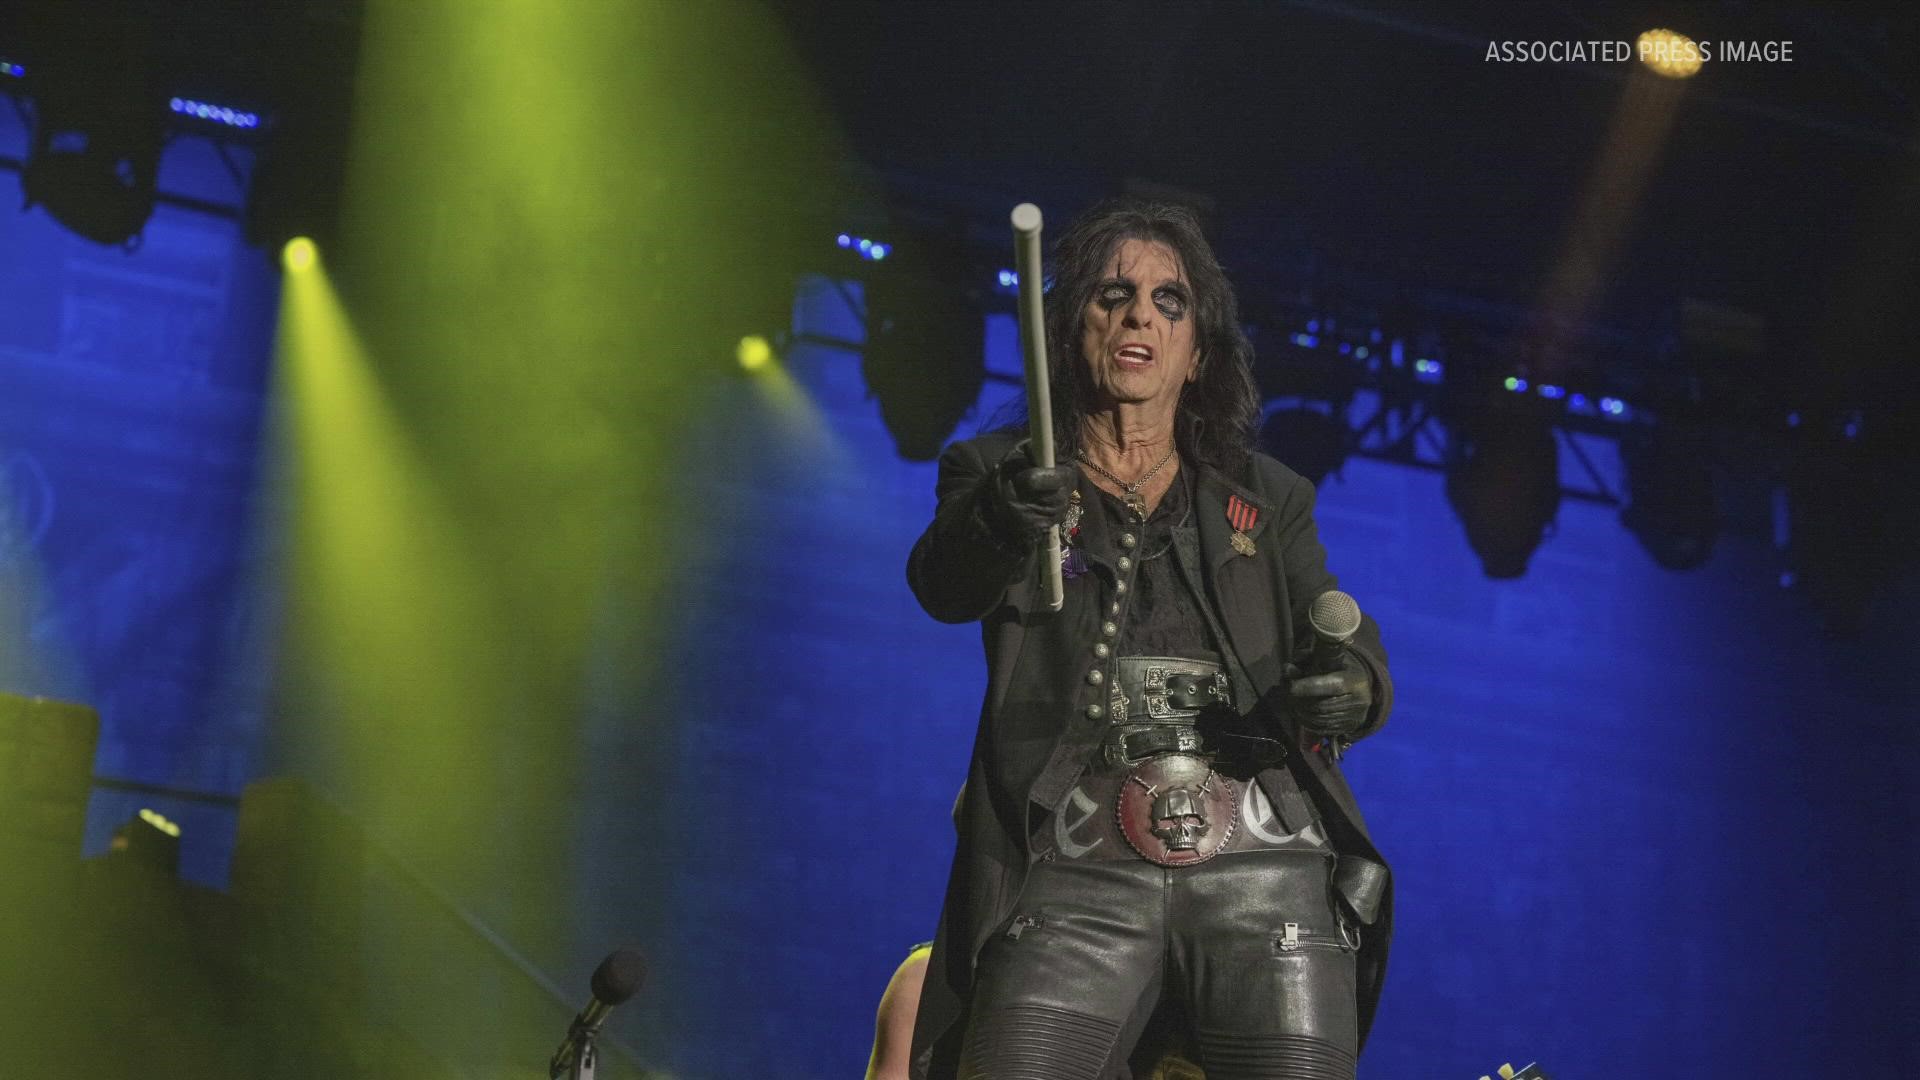 Get ready to rock with Alice Cooper! The "School's Out" shock rocker will be at the theater on Saturday, May 13.